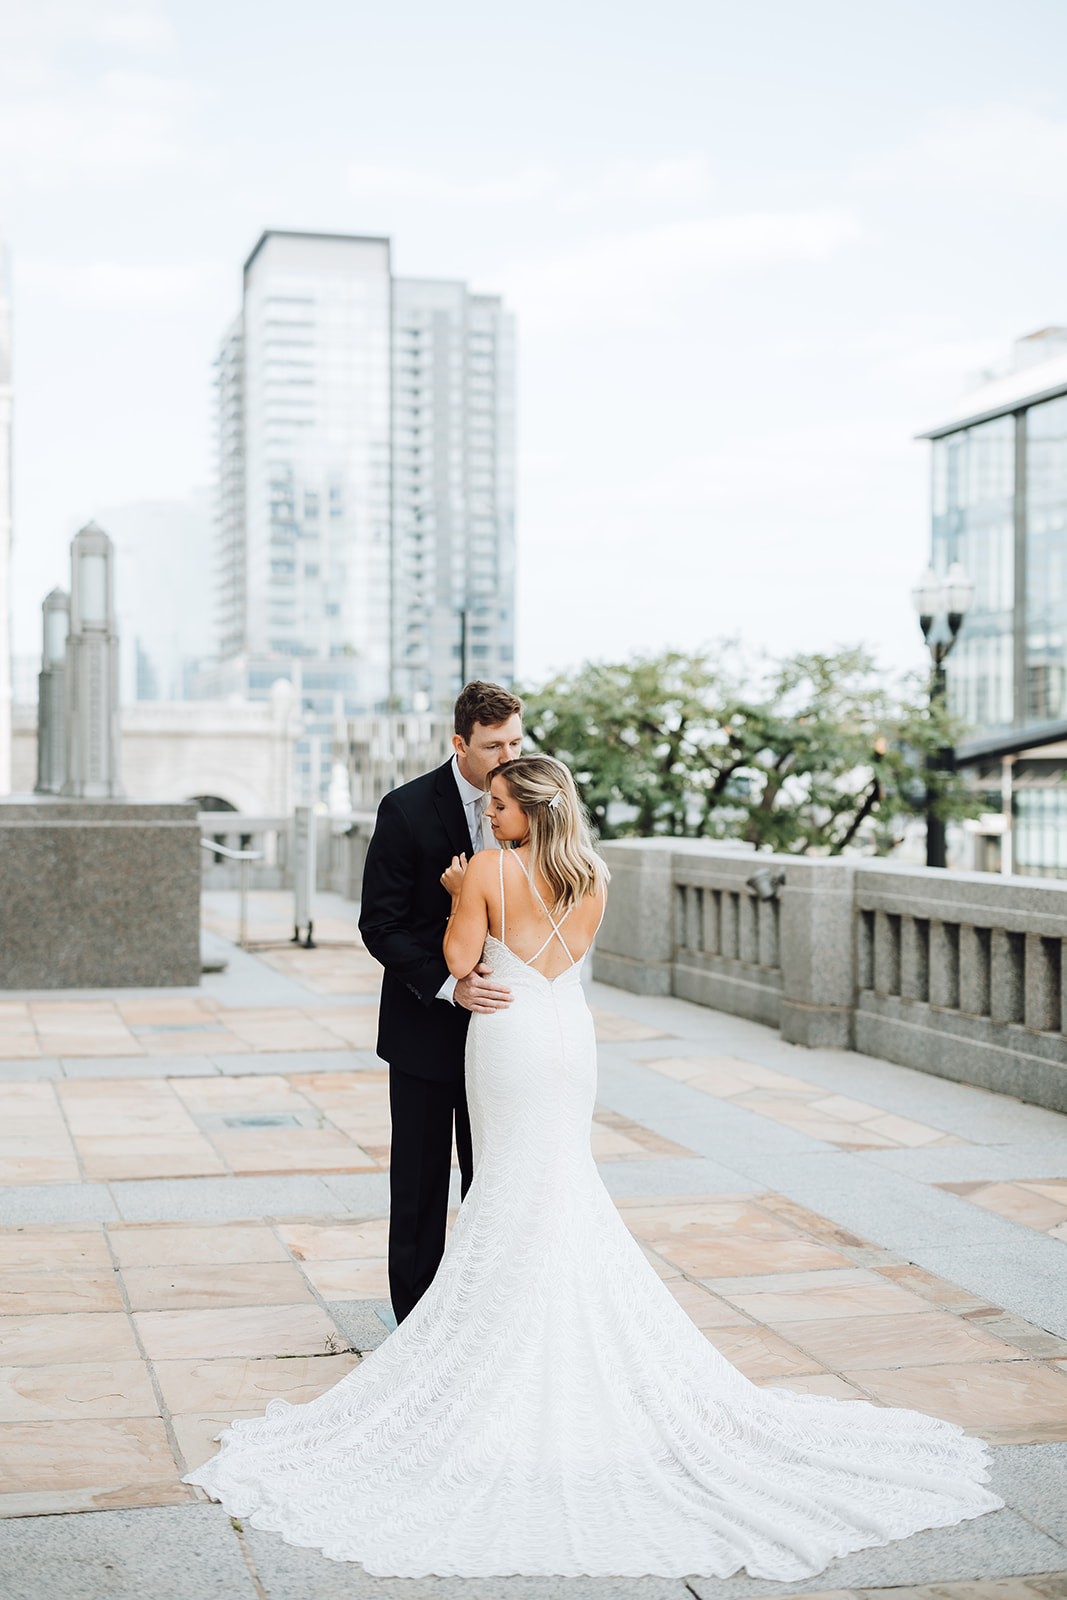 A groom kisses the head of his bride while standing on a stone patio